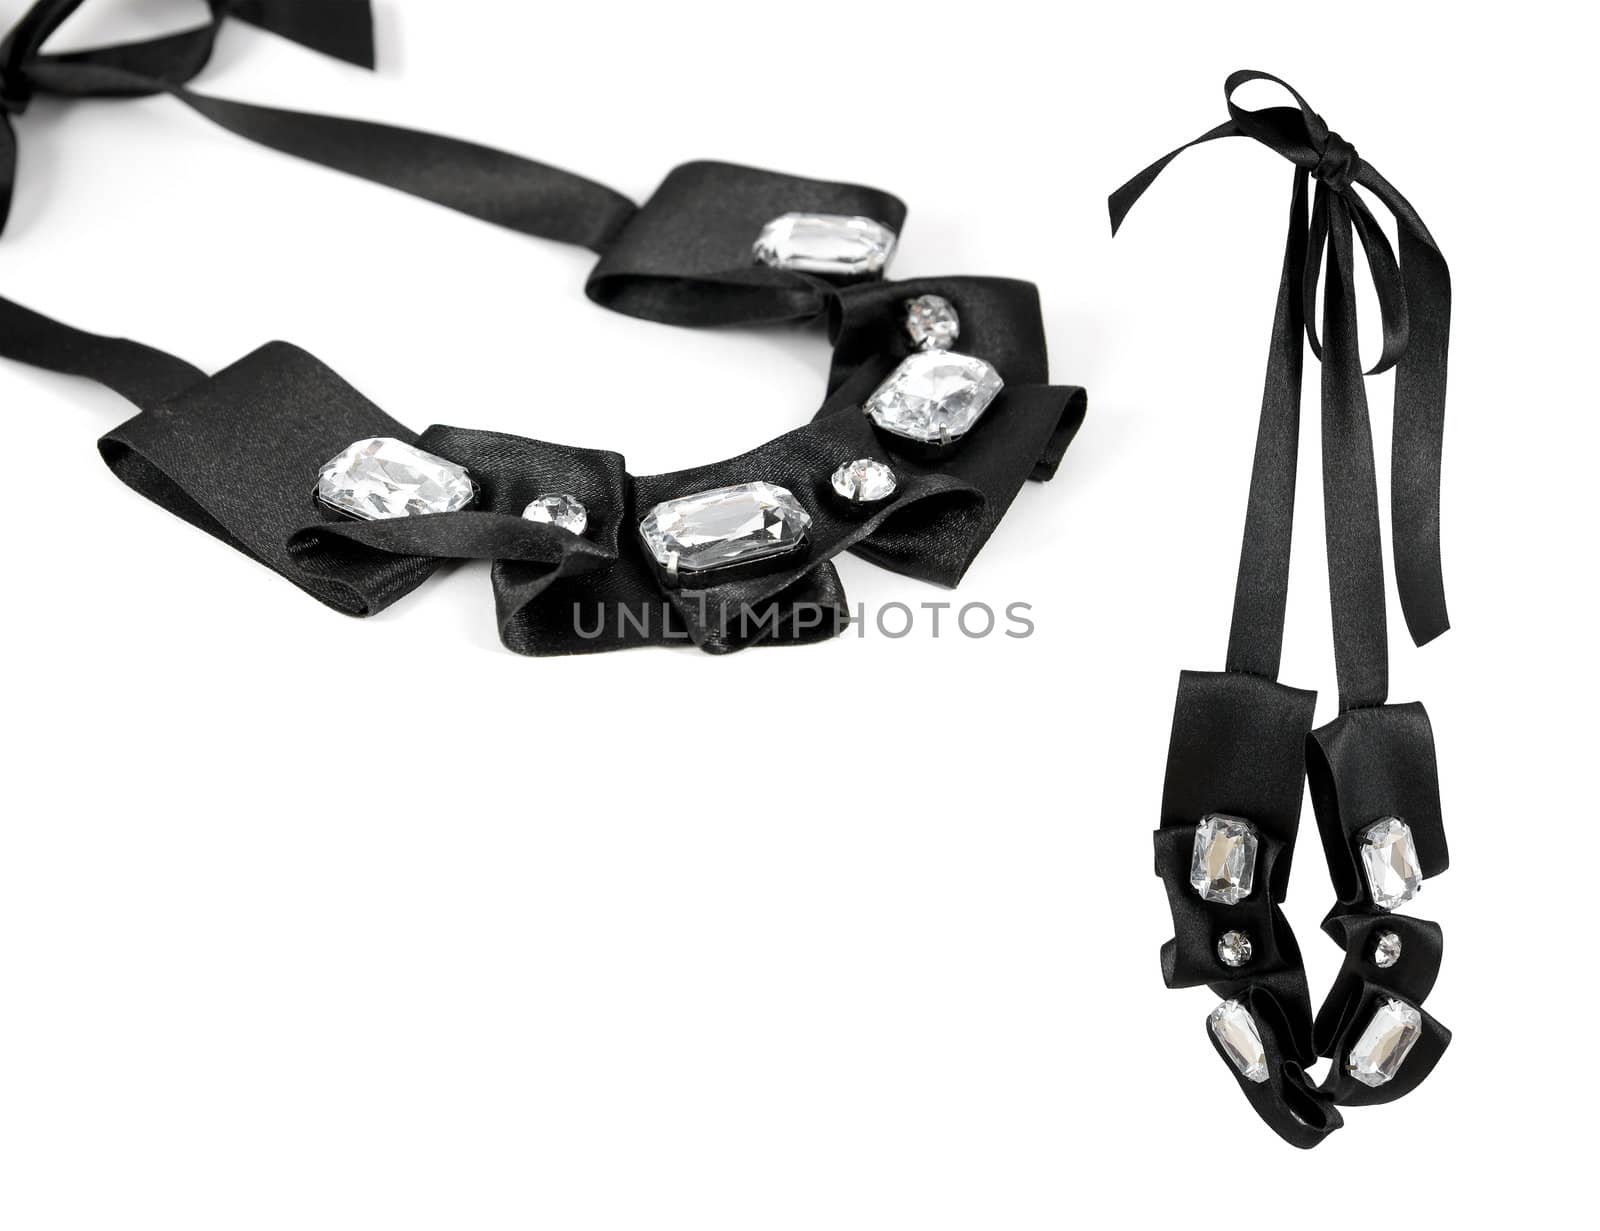 Elegant necklace with glossy glass gems on black ribbon. Isolated on white background. Copy-space.